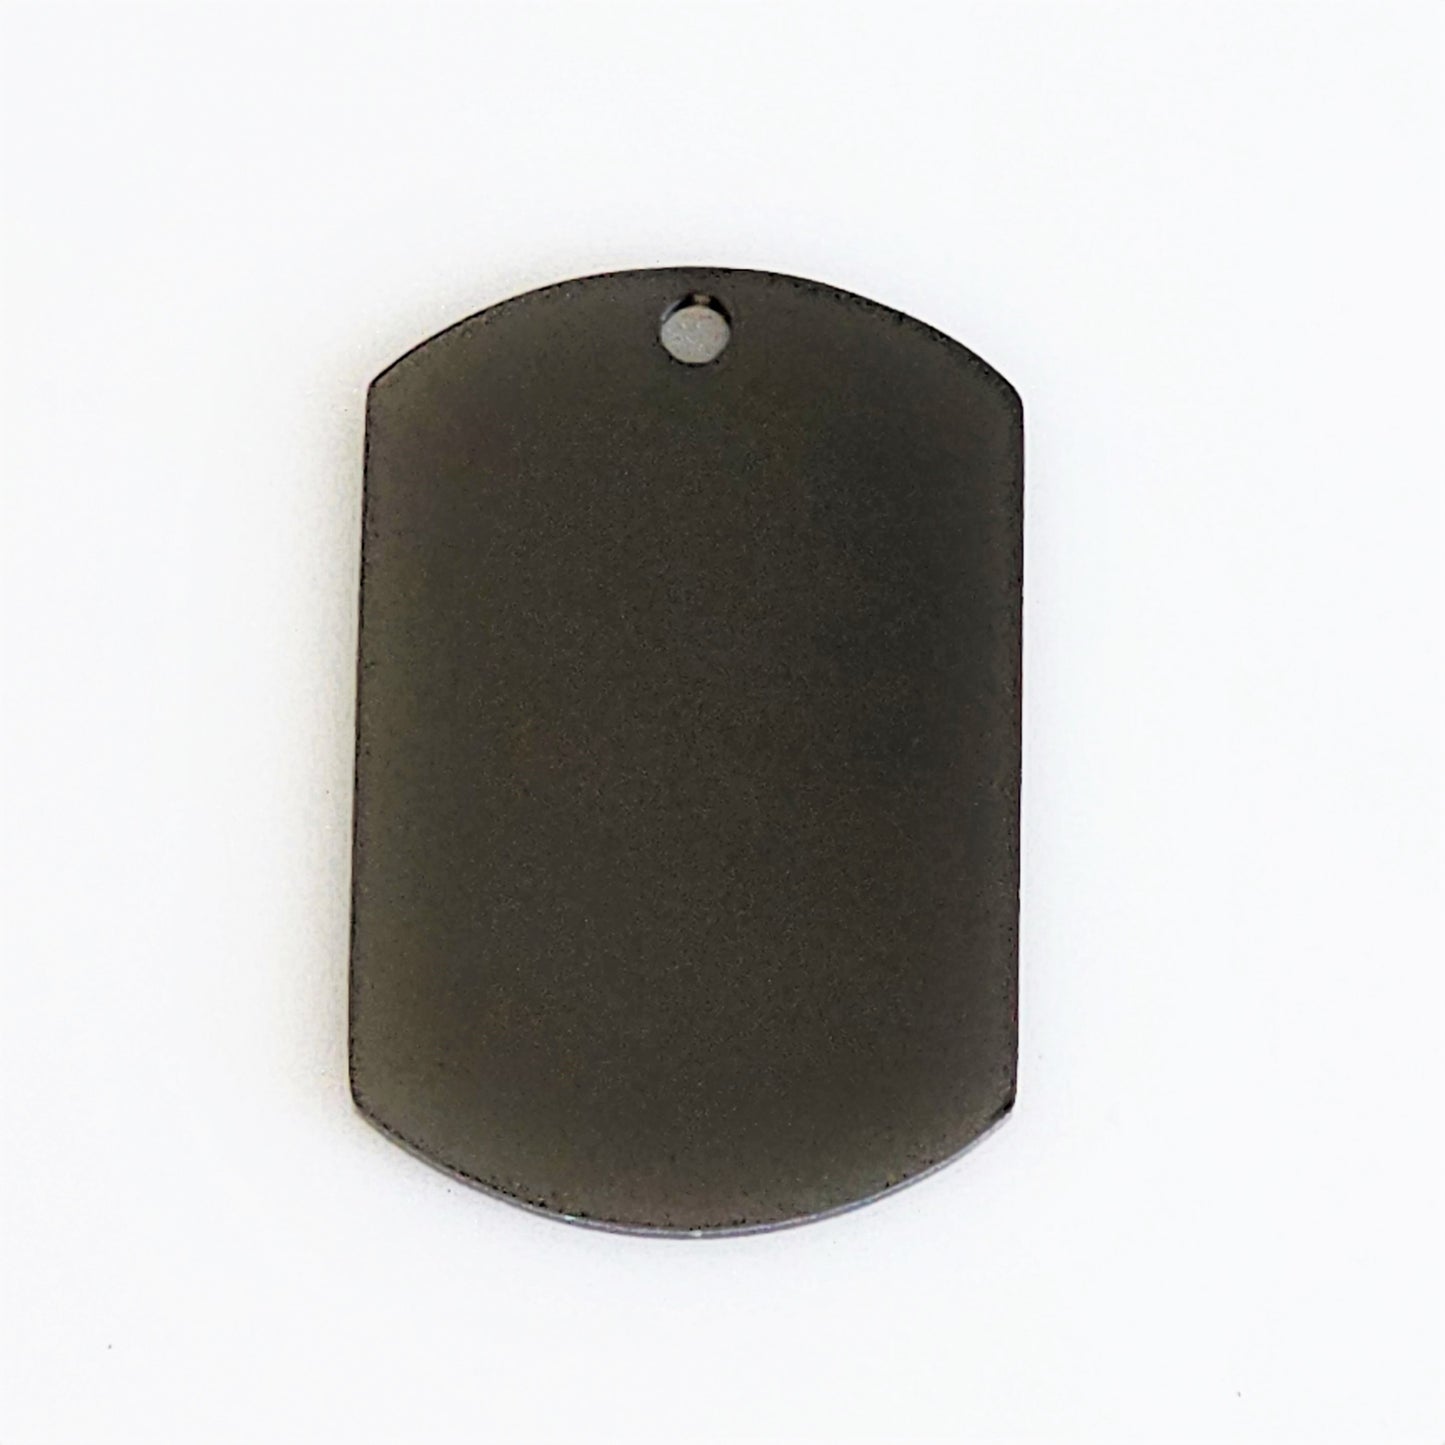 Black Plated Stainless Steel - 3/4" x 1" Dog Tag